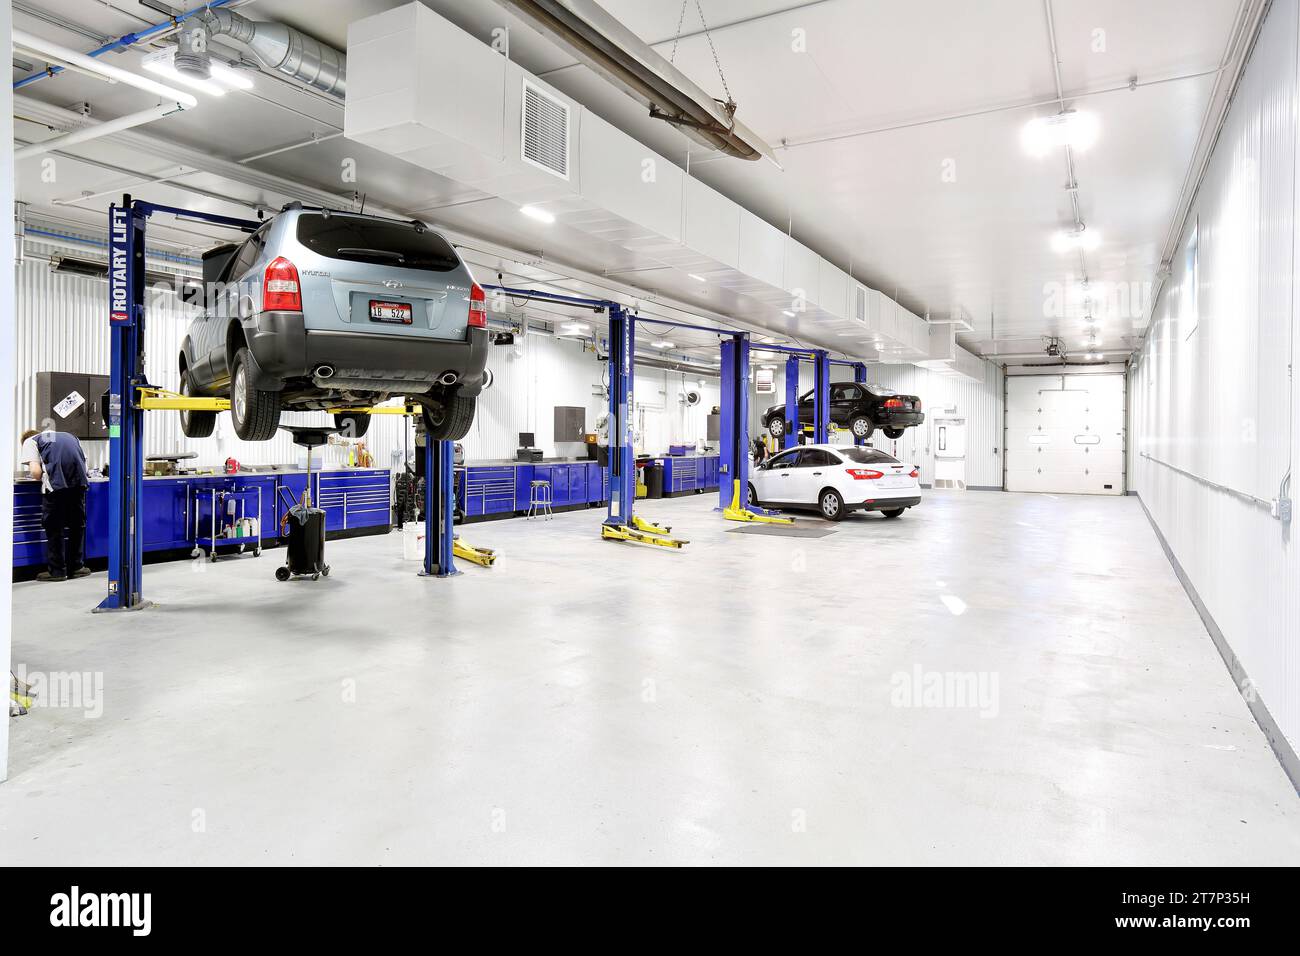 Cars lifted up on hydraulic lifts in a clean new modern car repair shop Stock Photo